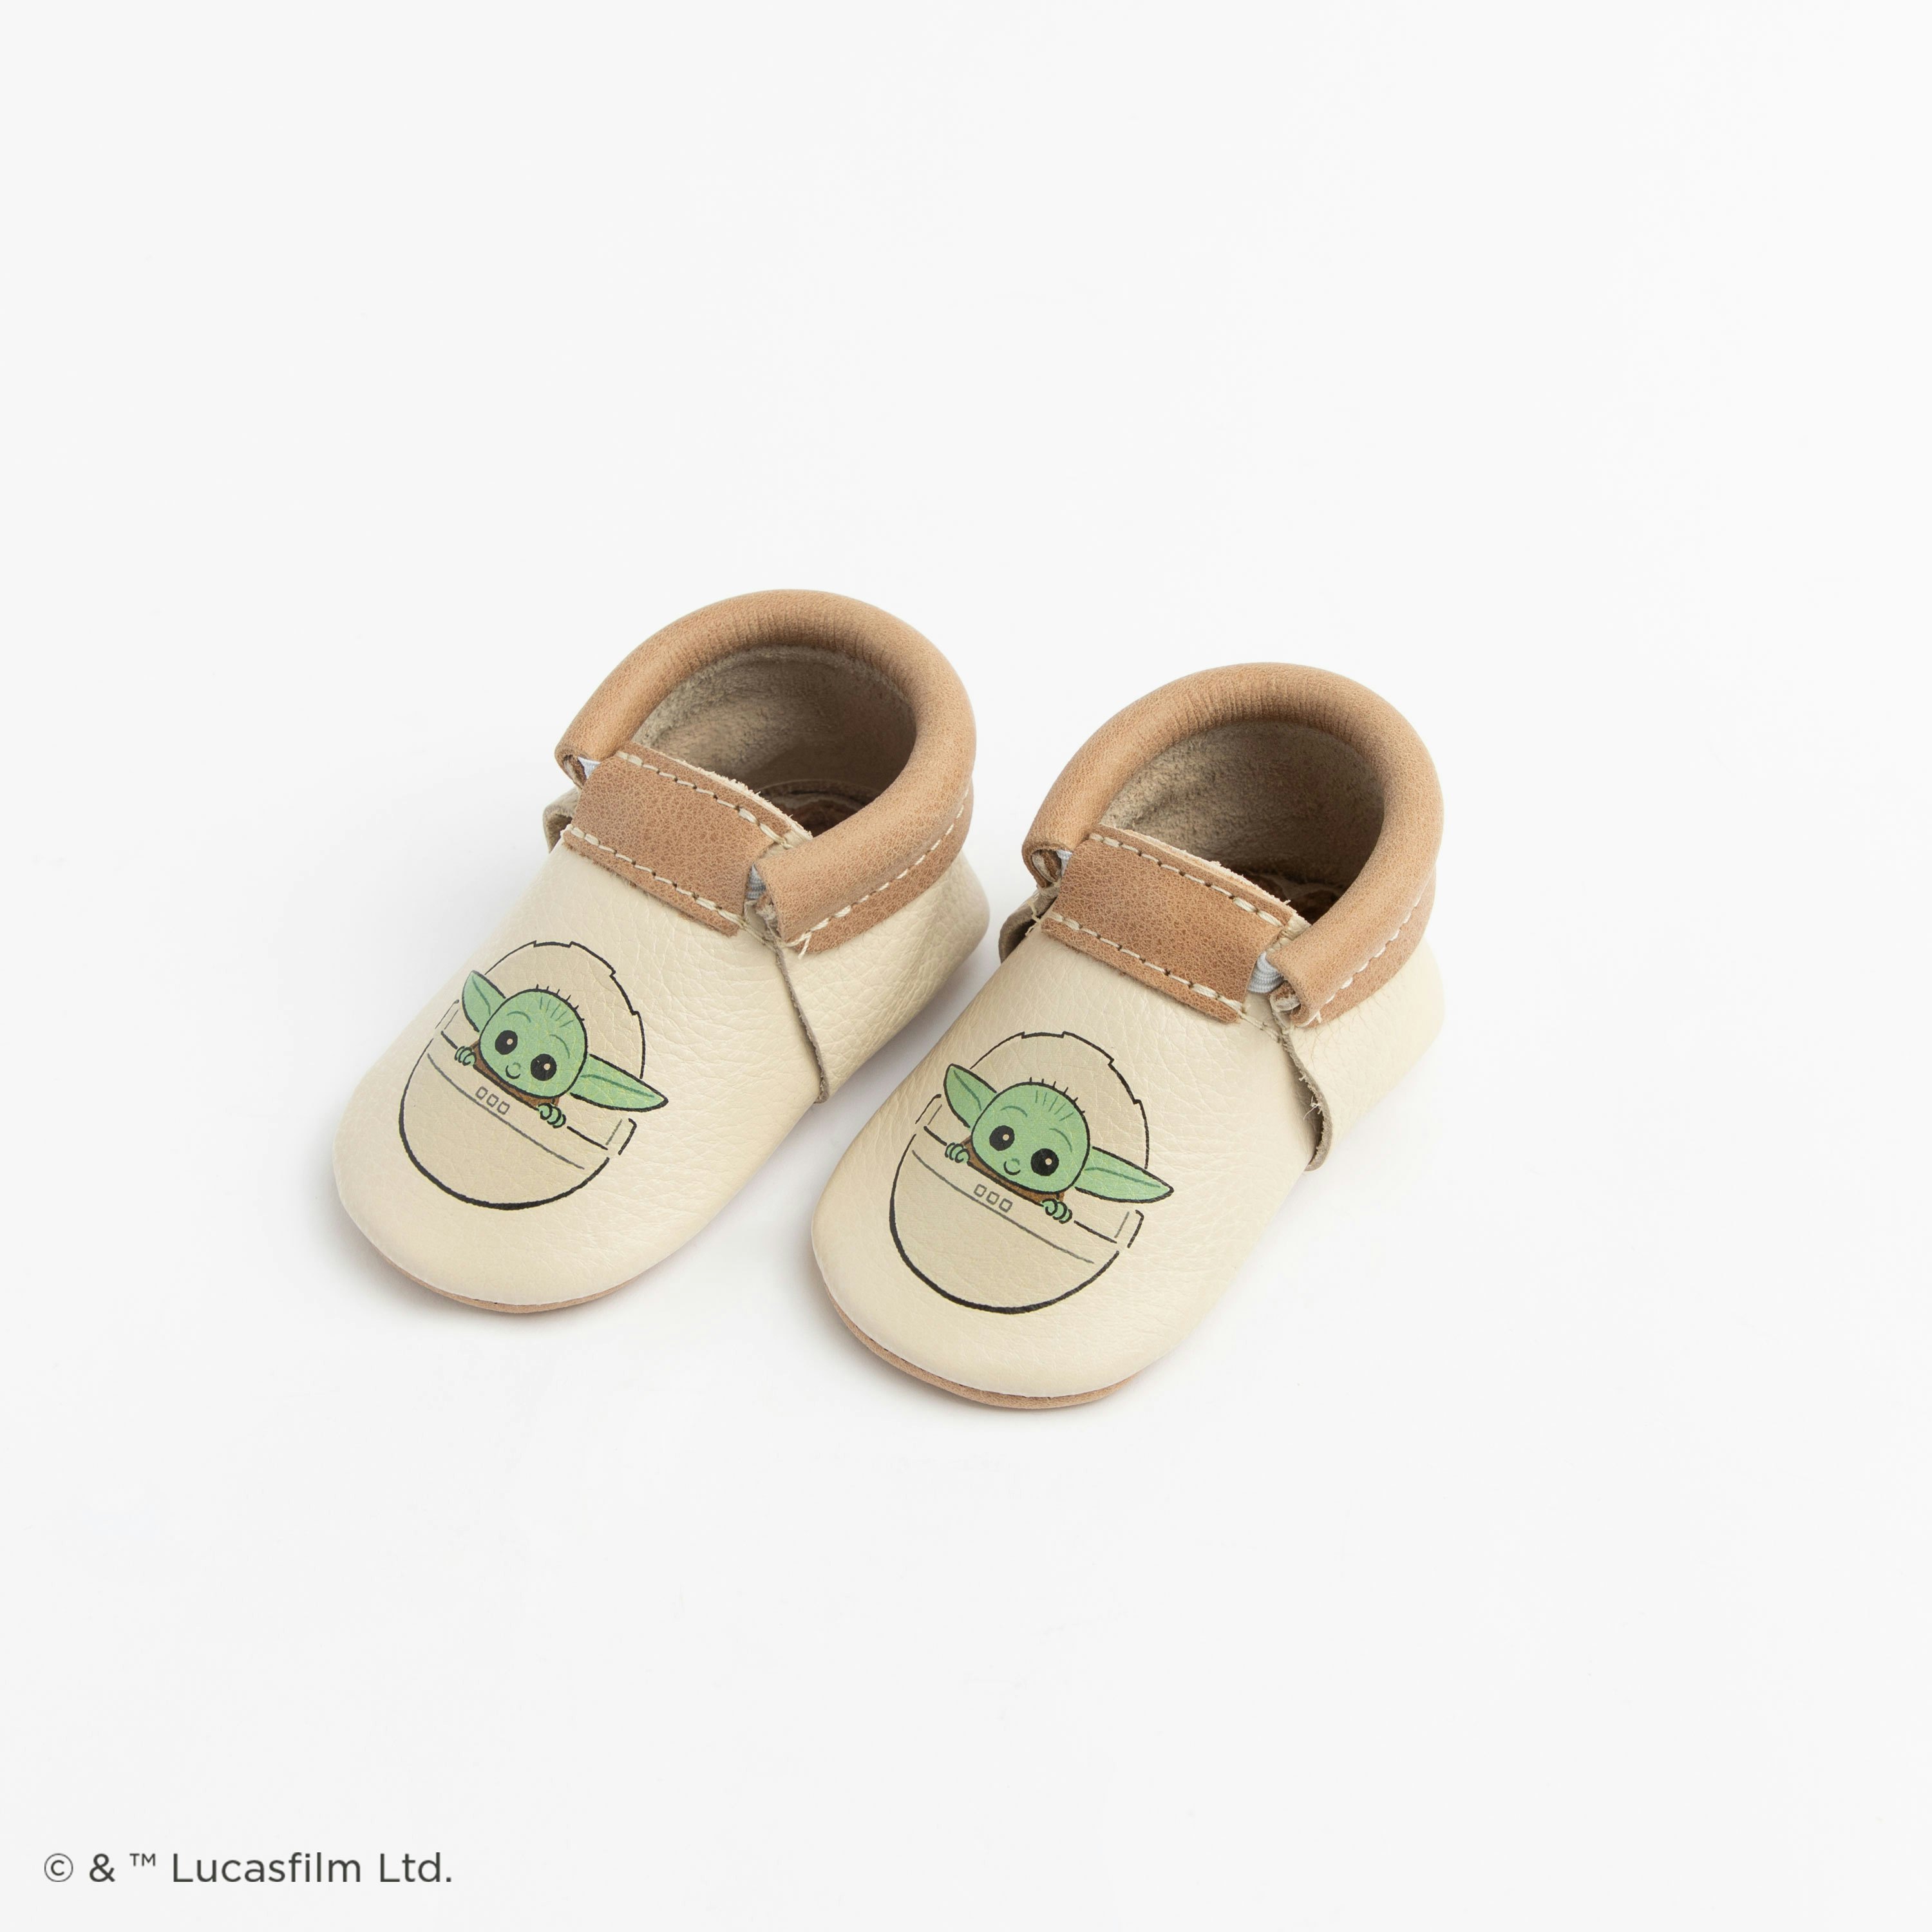 Freshly Picked Baby Yoda Moccasins Are 